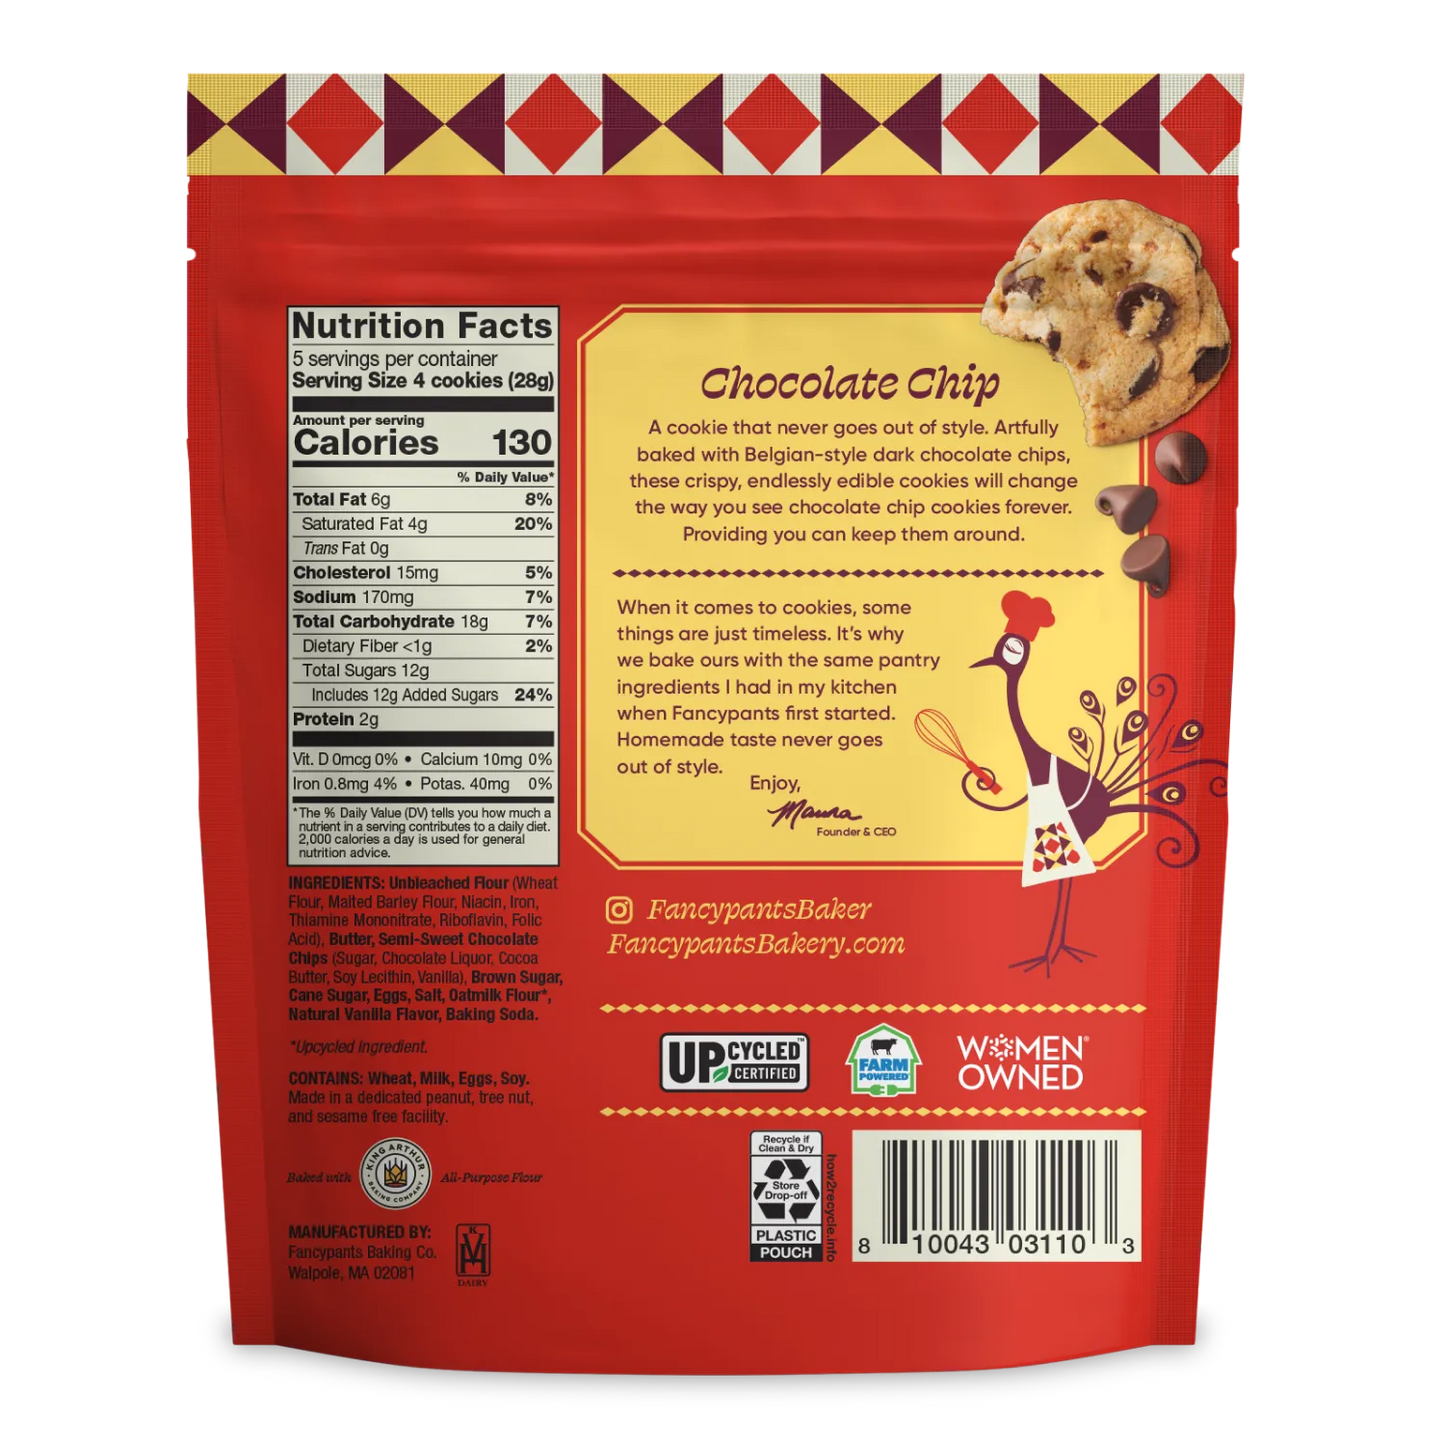 Fancypants Chocolate Chip Packaging Back Panel